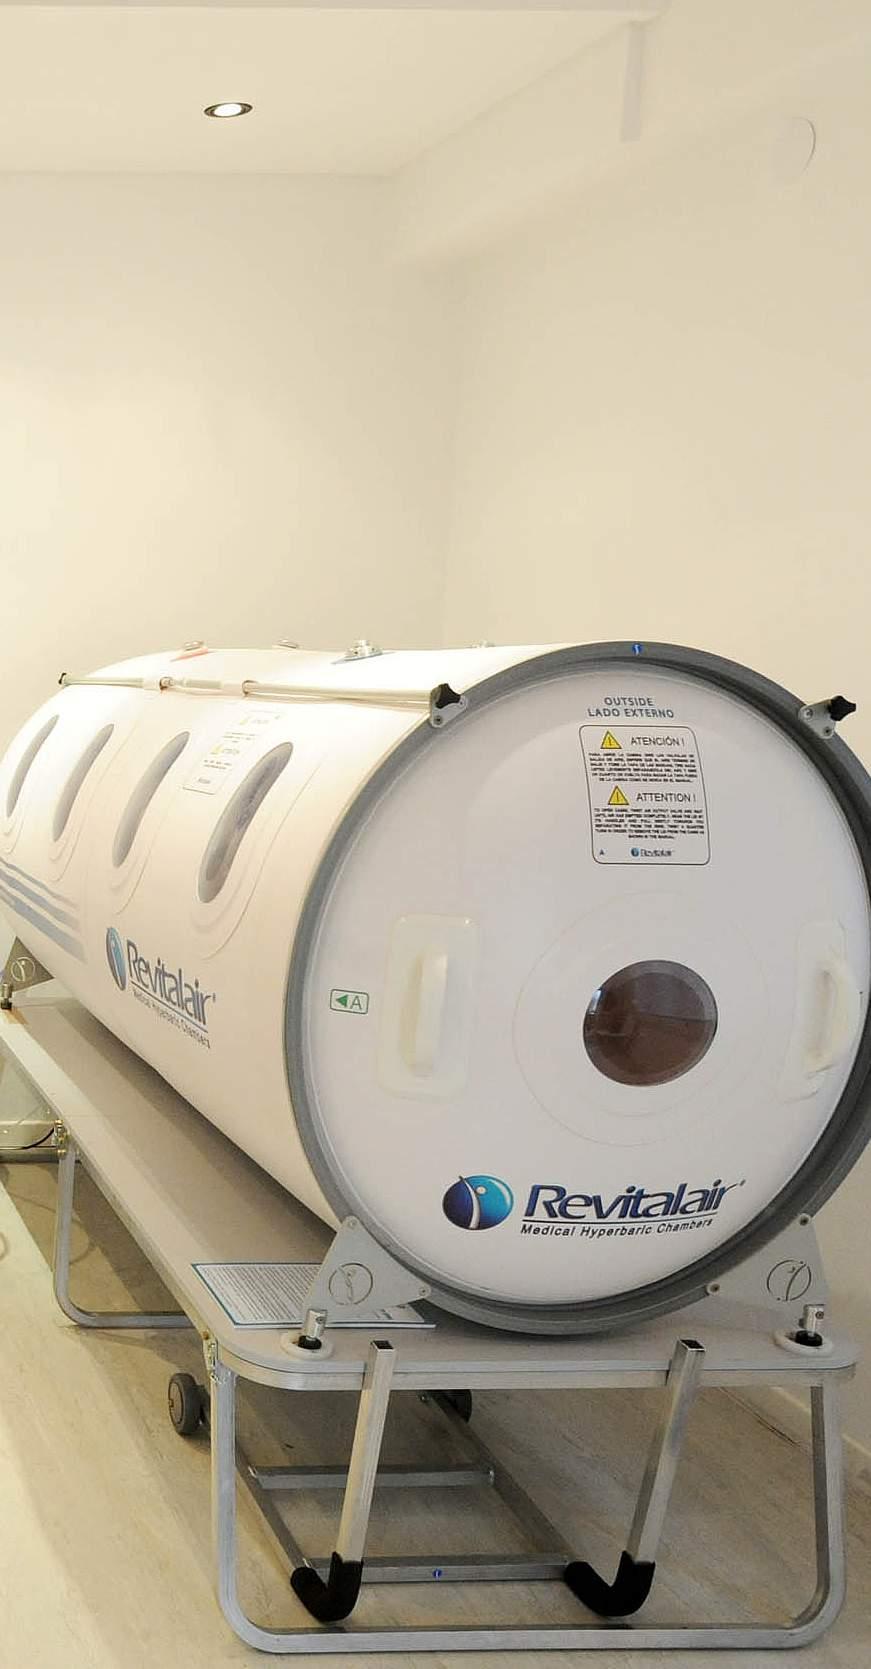 BioBarica BioBarica is a global network of hyperbaric medicine designed to expand the availability of high quality therapeutic Centers BioBarica consists of a